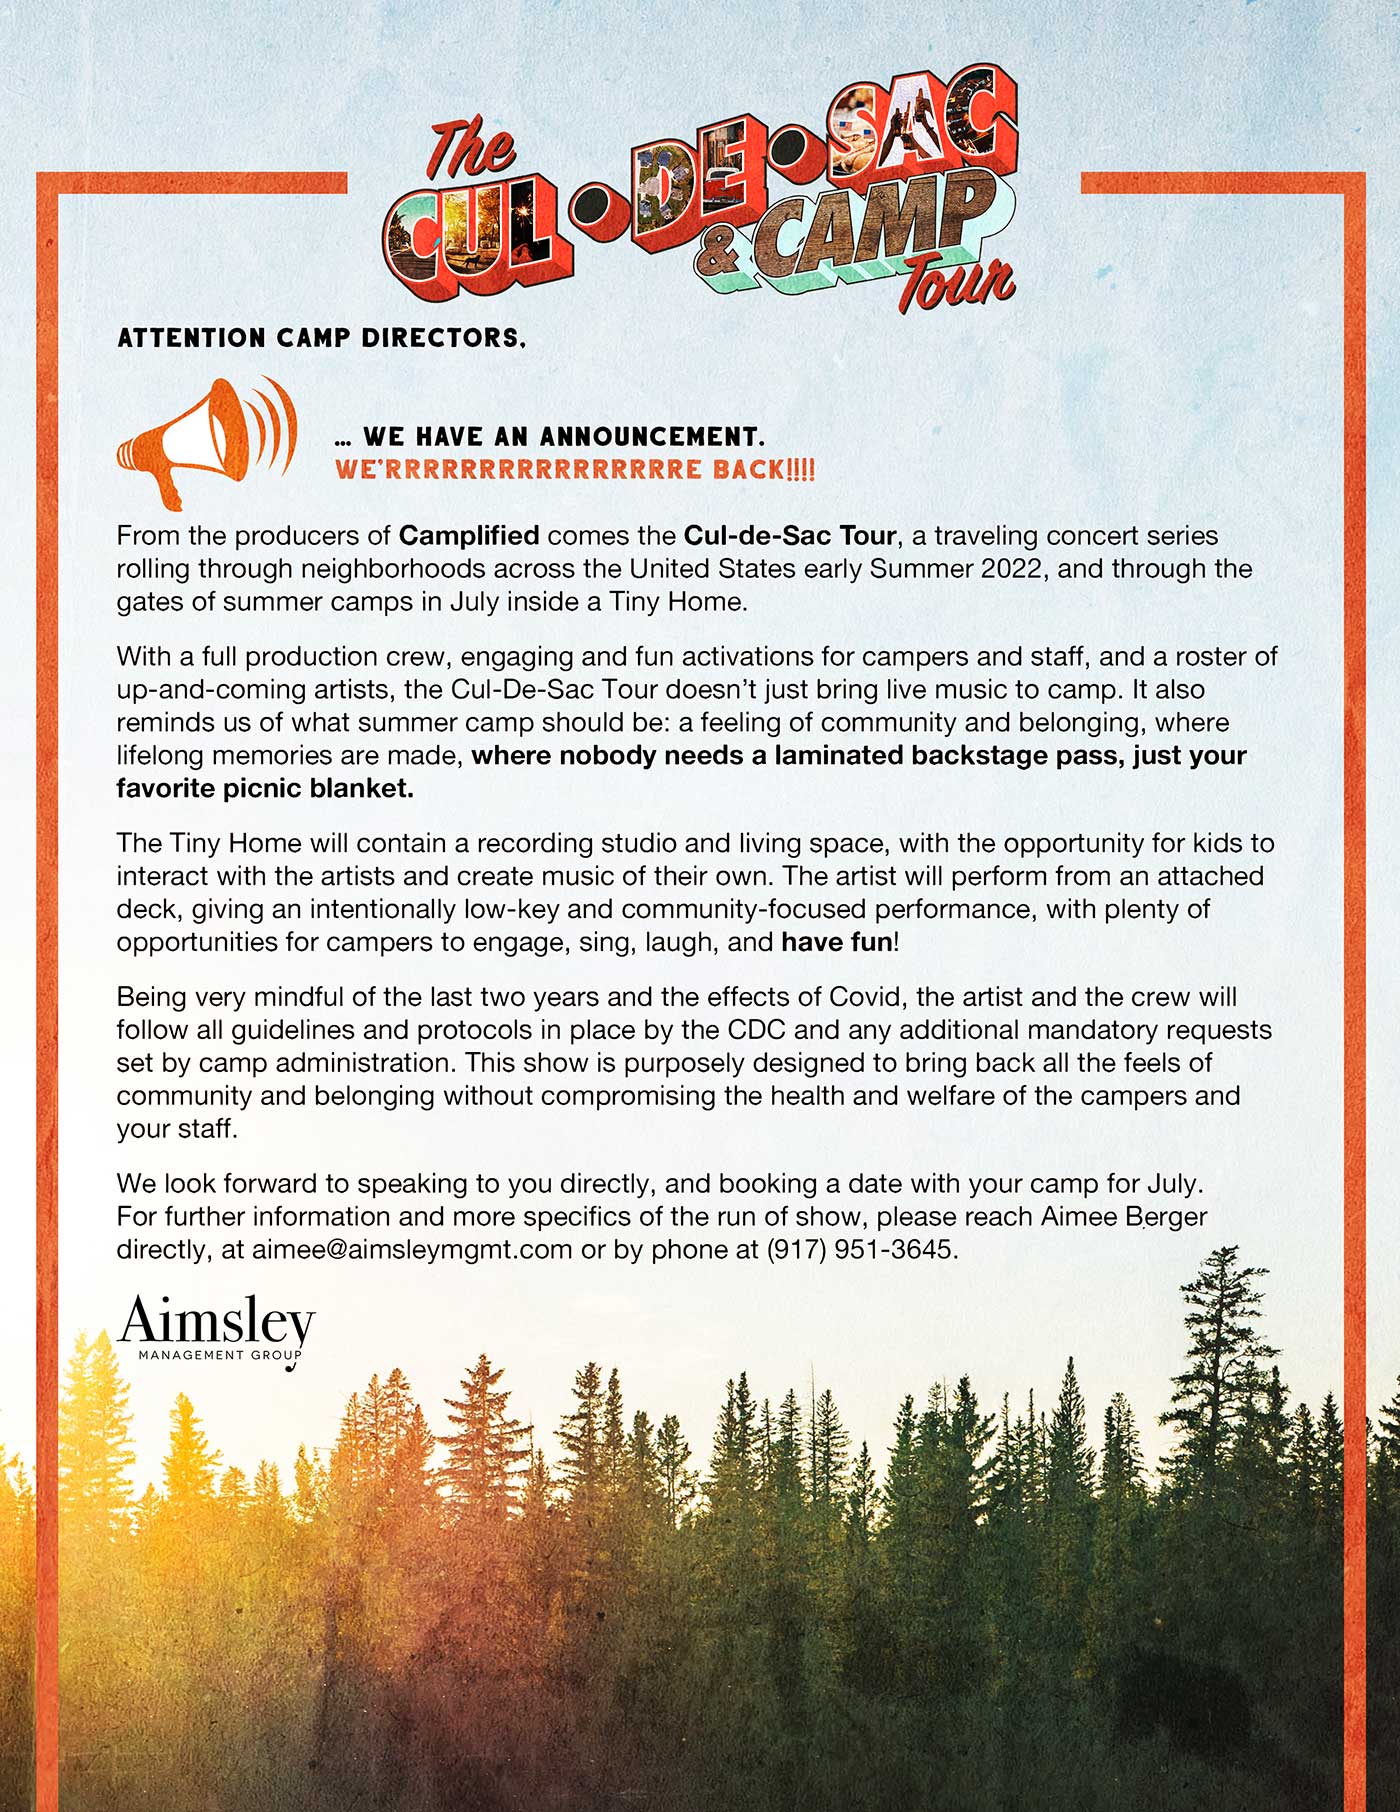 The Culdesac and Camp Tour Camp Letter